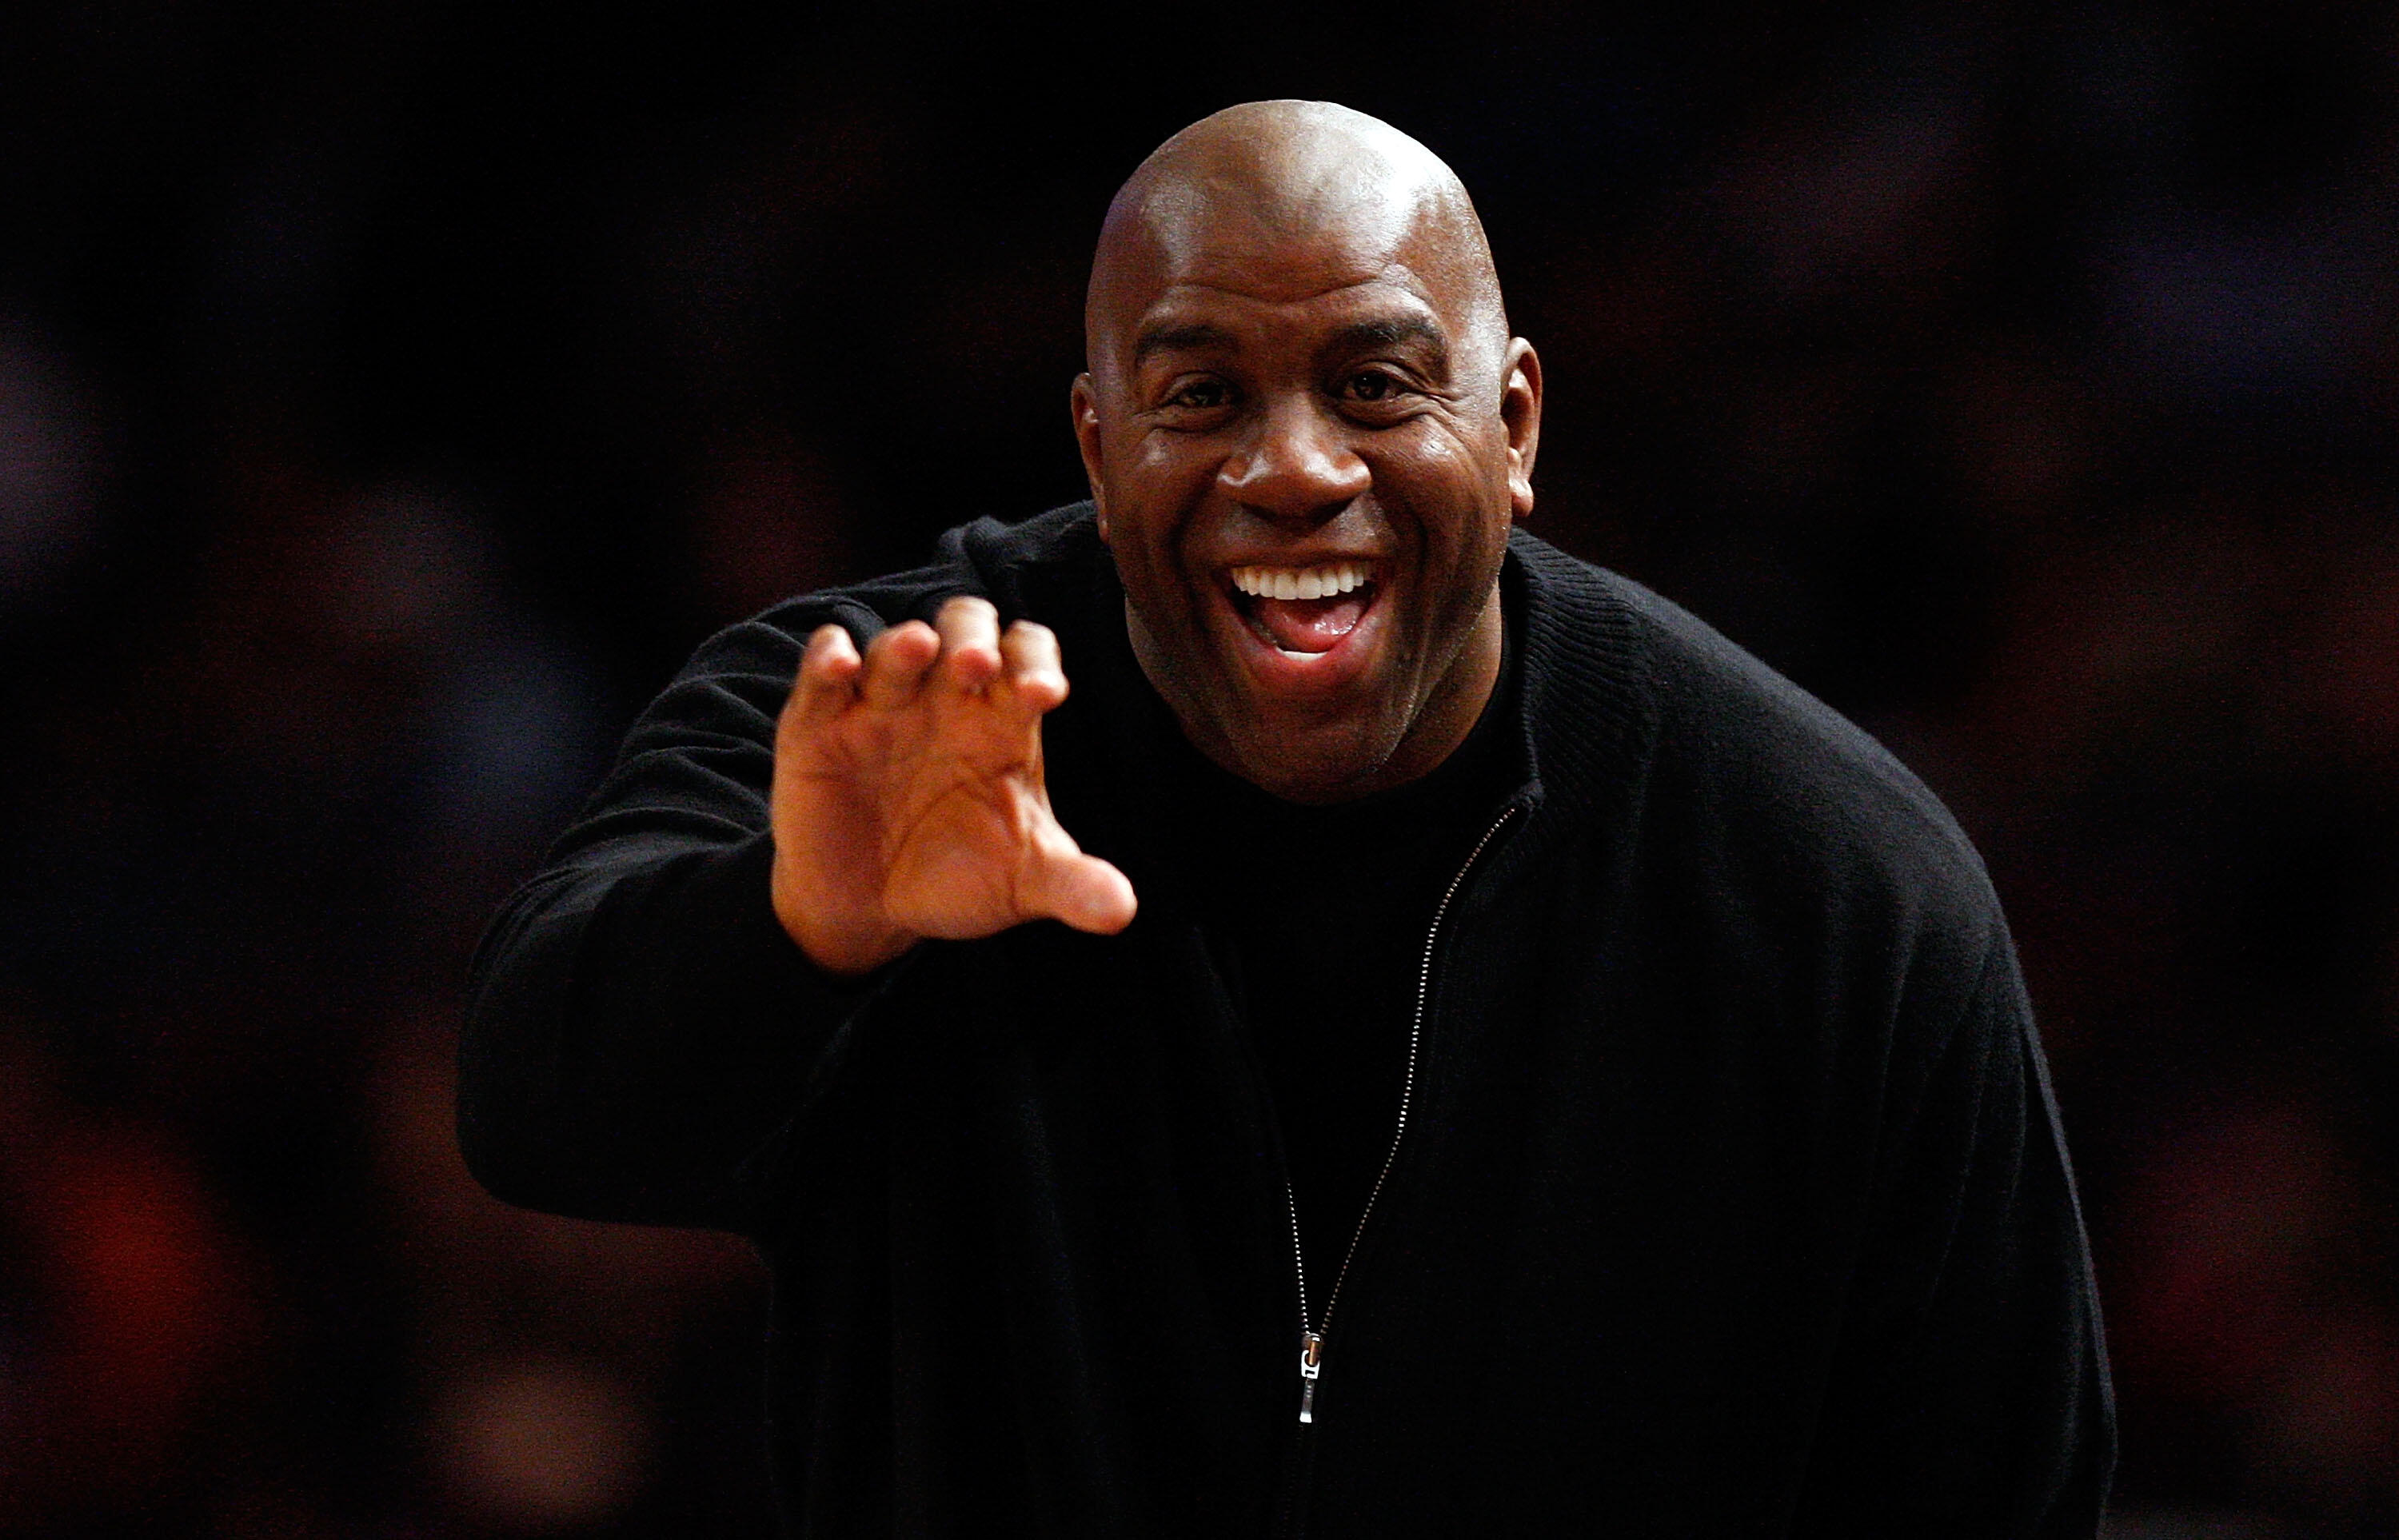 NEW YORK - NOVEMBER 16:  NBA legend, Magic Johnson waves on the sideline during the game between the Dallas Mavericks and the New York Knicks on November 16, 2008 at Madison Square Garden in New York City. NOTE TO USER: User expressly acknowledges and agr